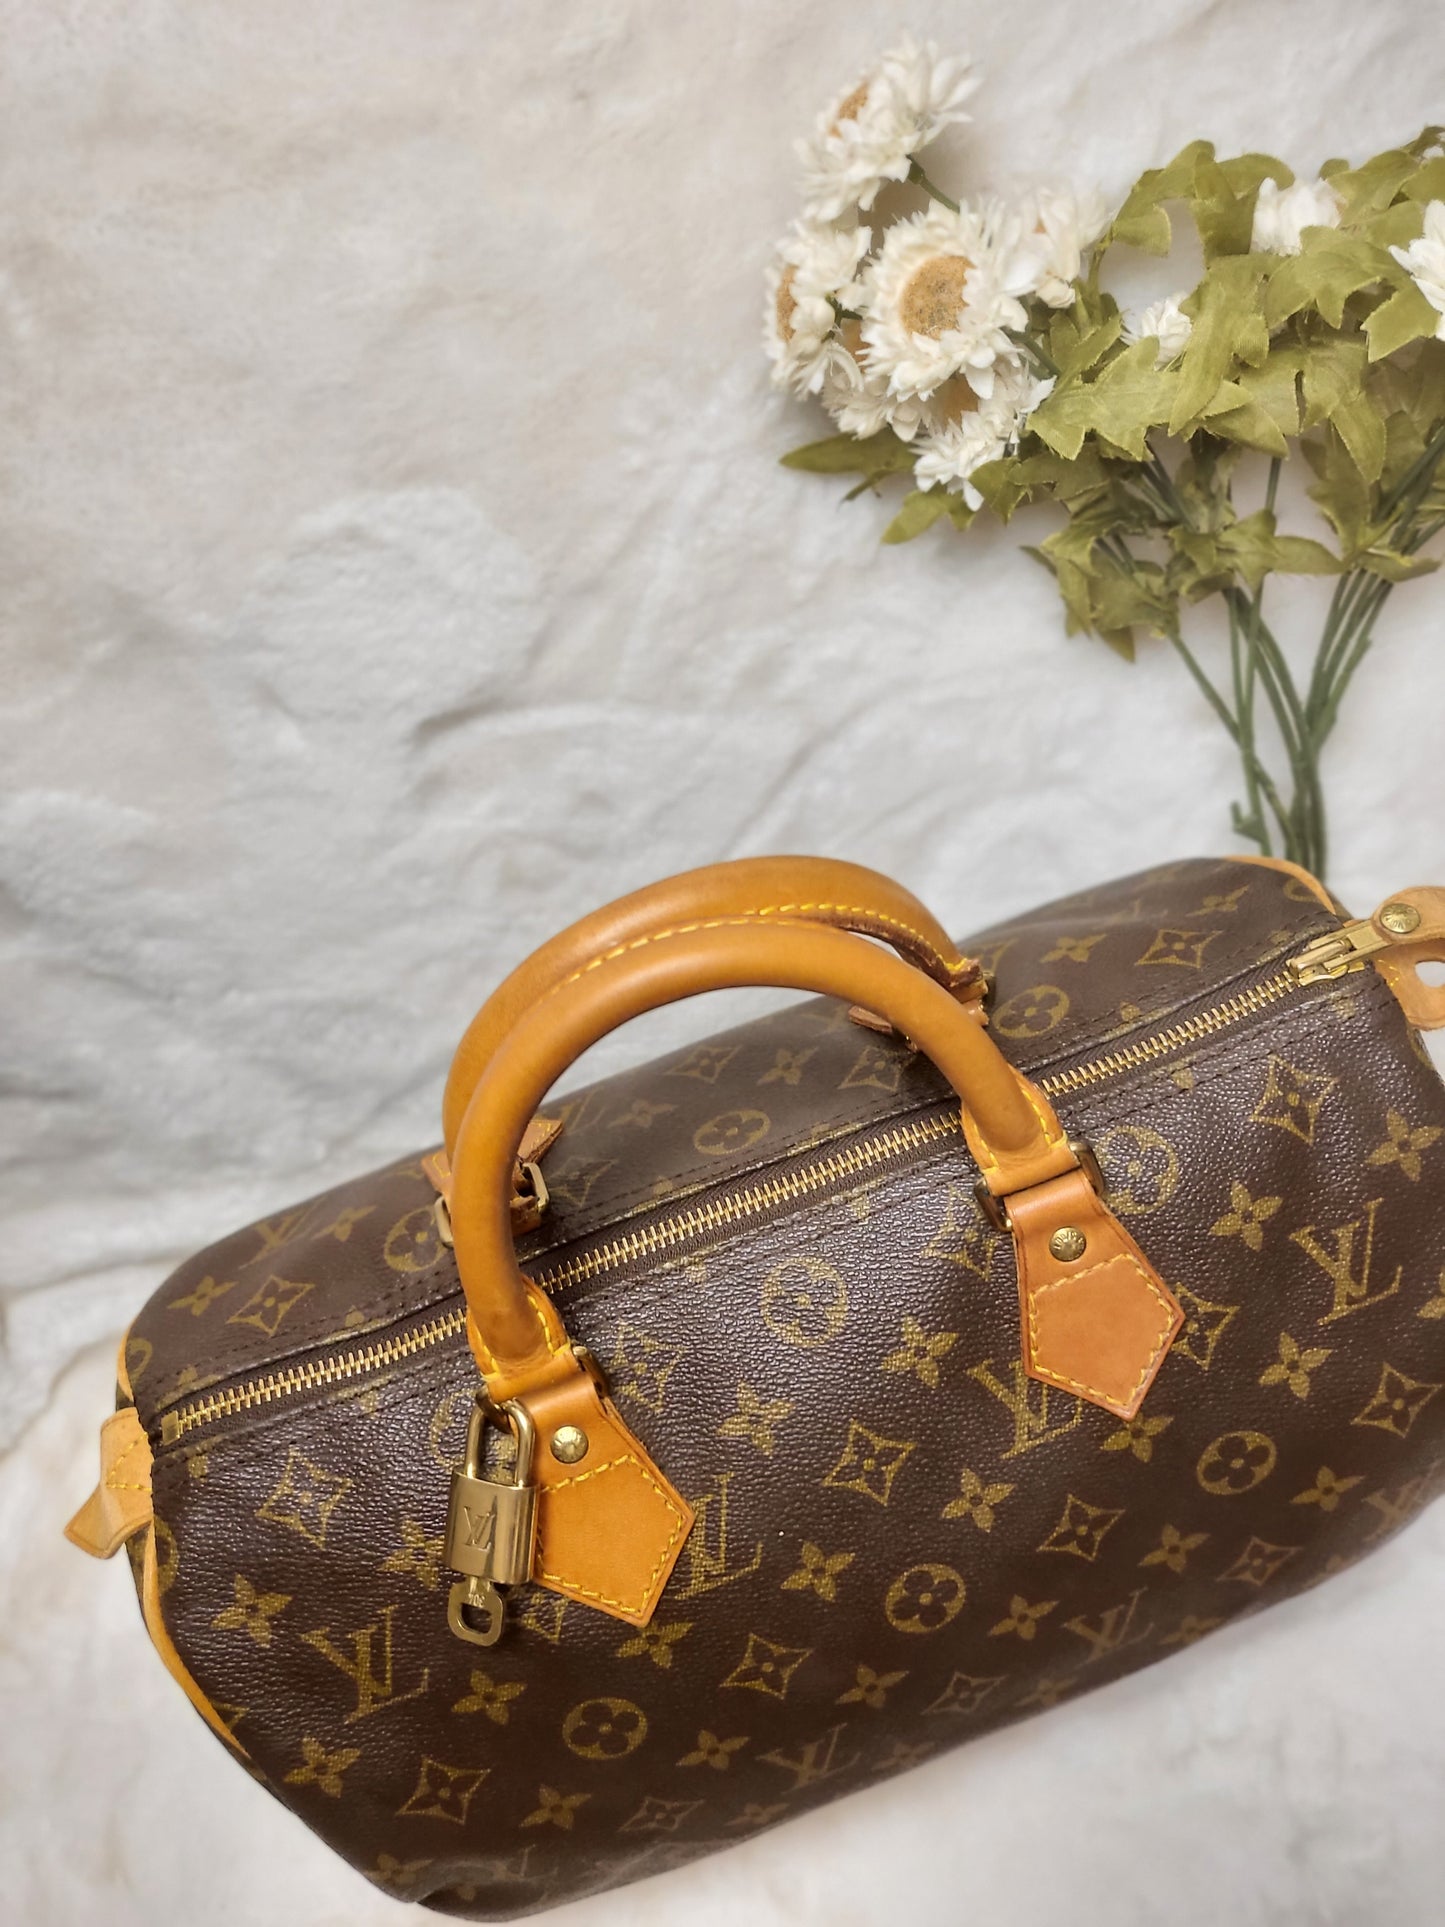 Authentic pre-owned Louis Vuitton speedy 30 with lock set